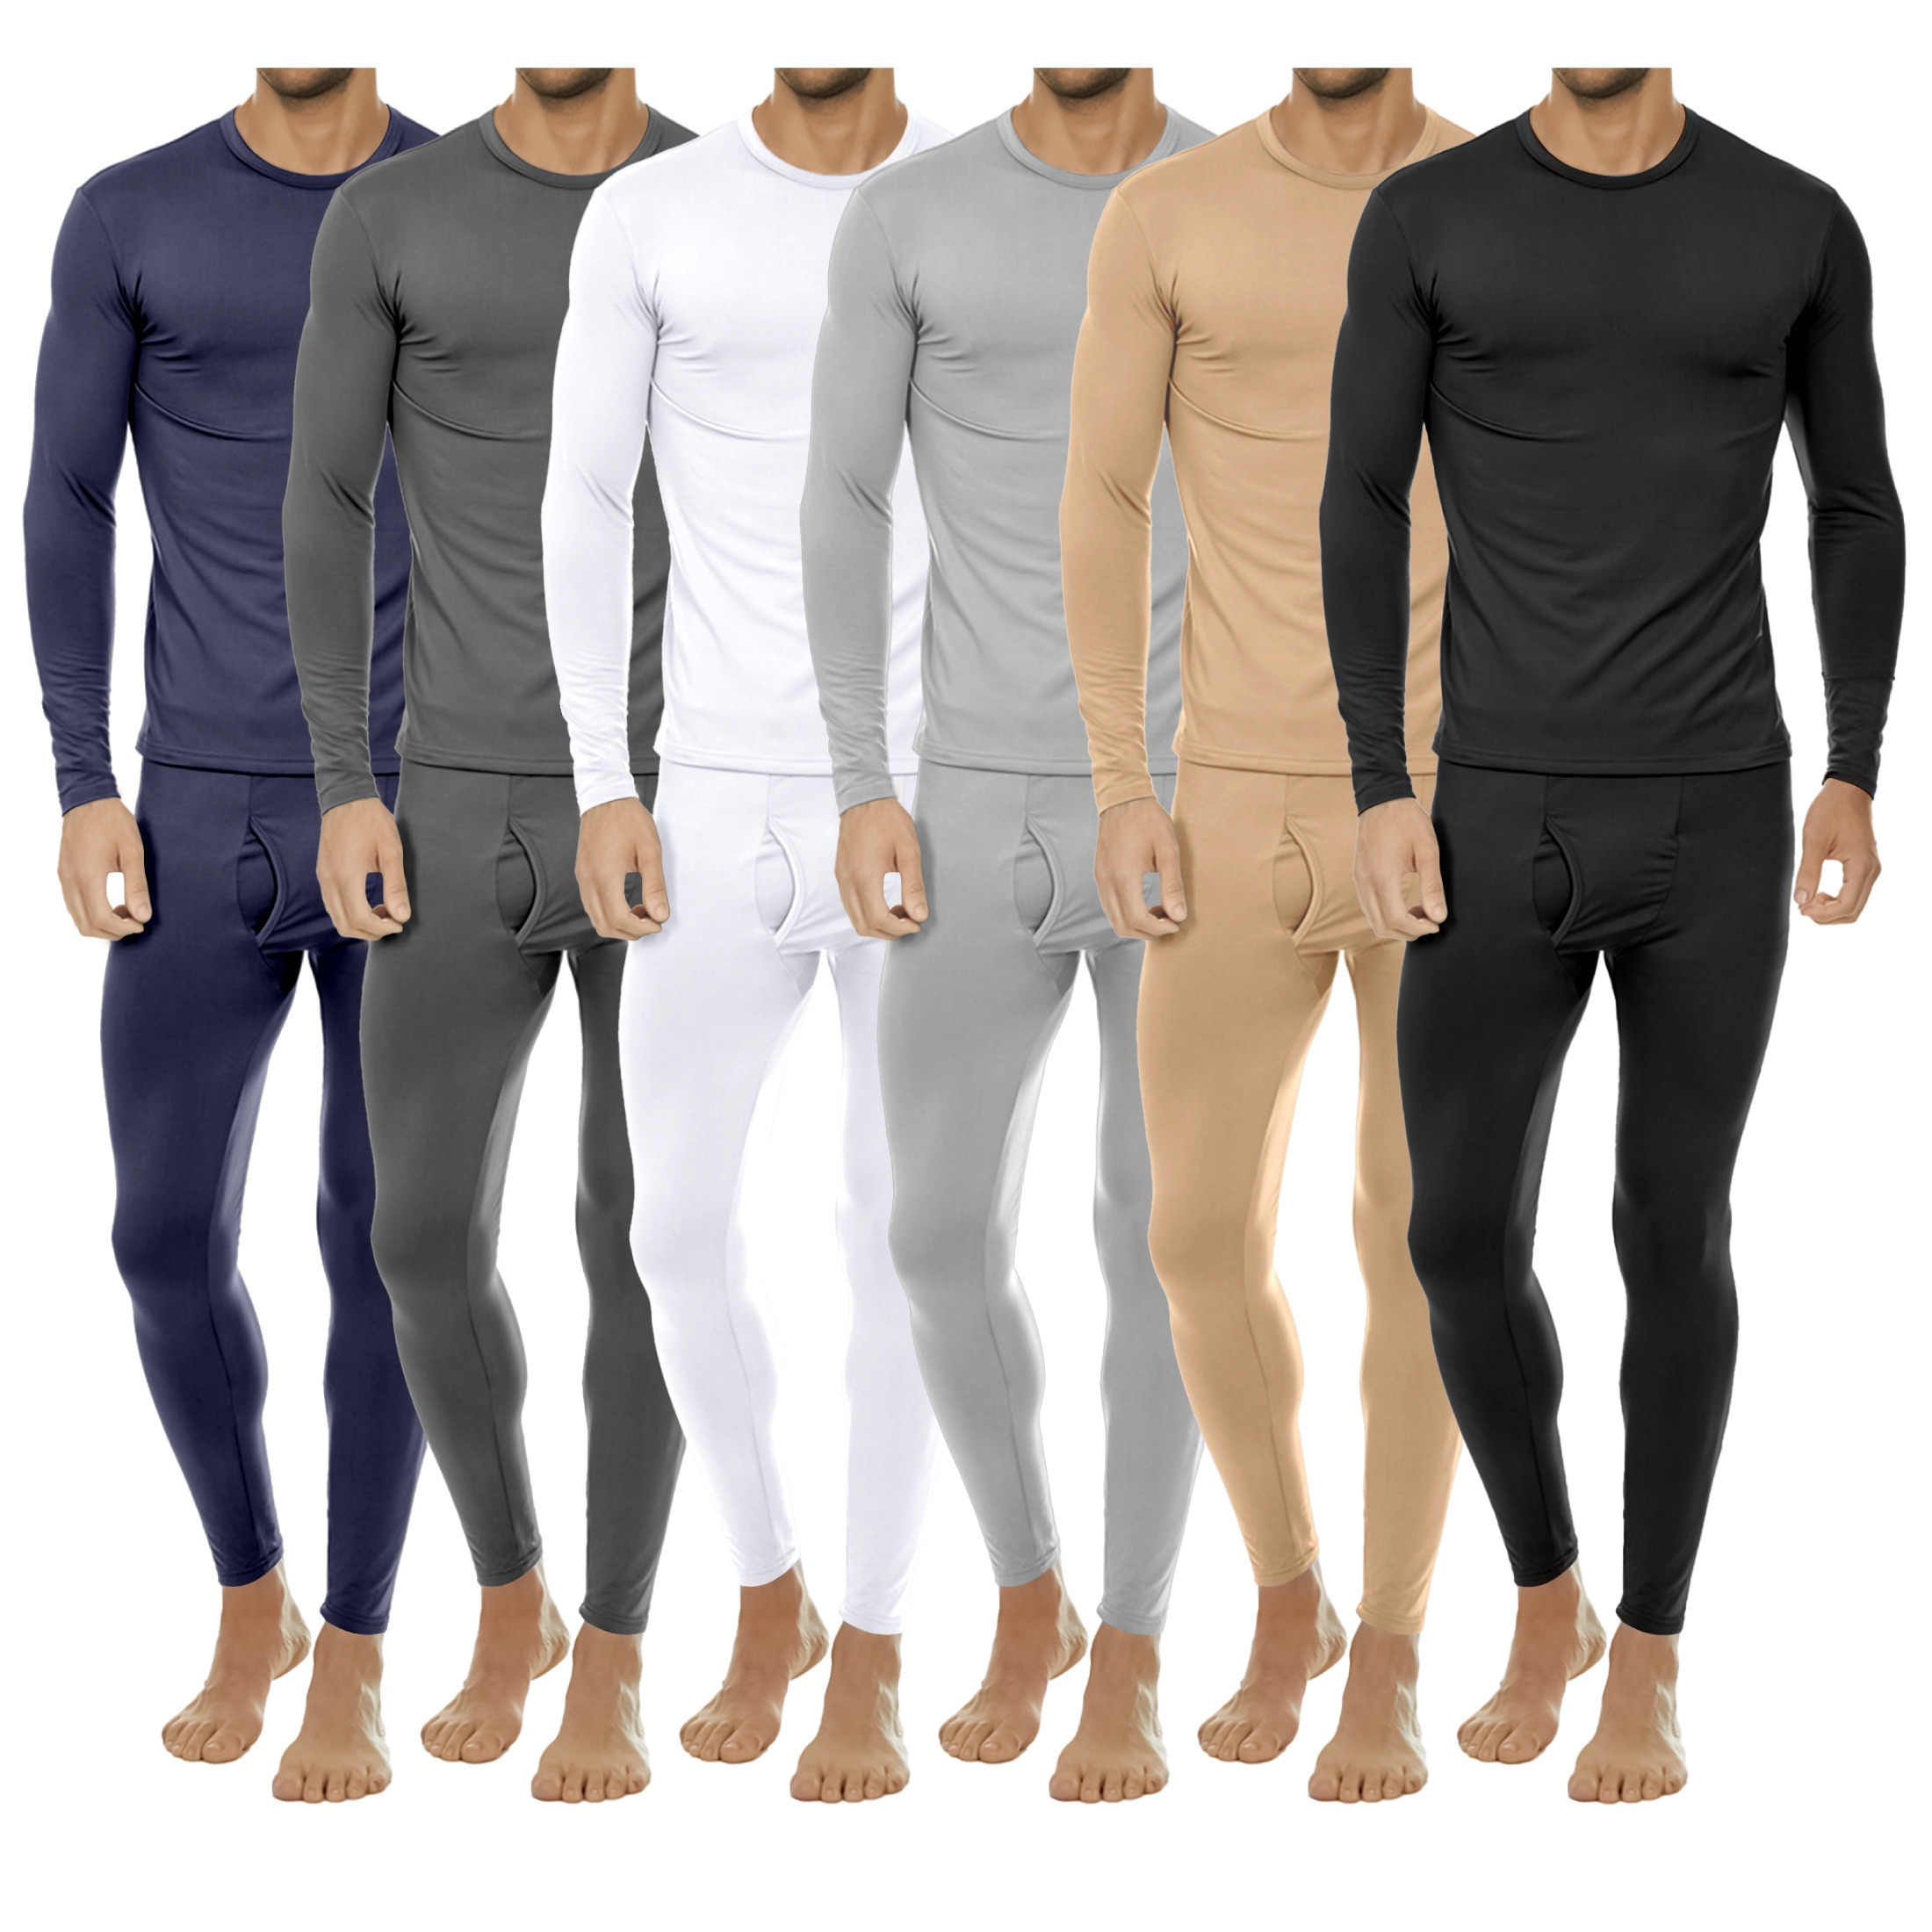 4-Piece: Men's Fleece Lined Thermal Set For Cold Weather - Medium